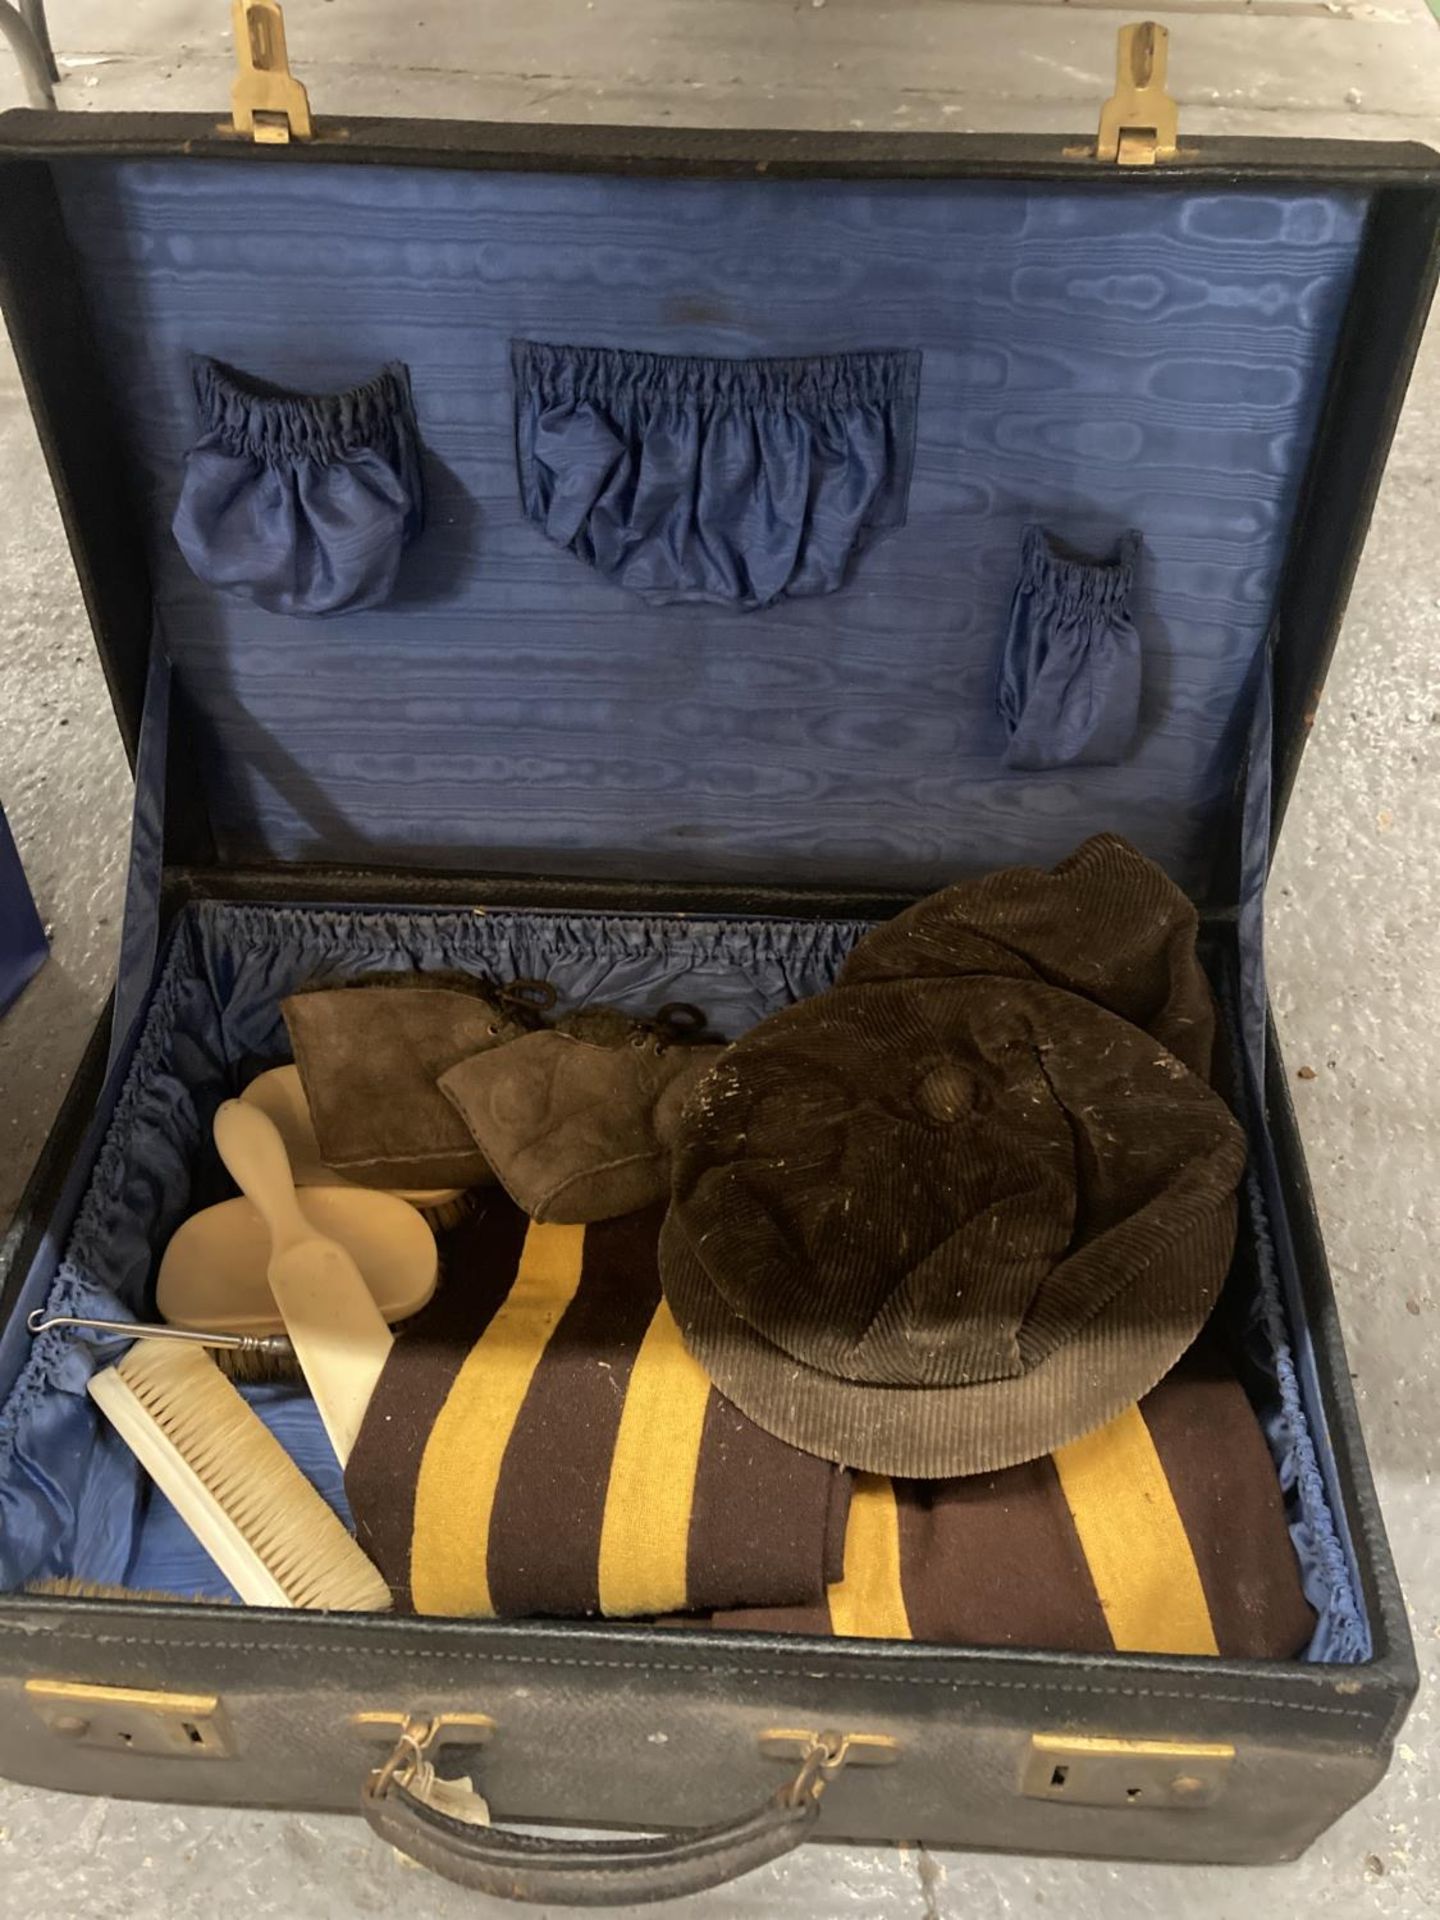 A VINTAGE SUITCASE CONTAINING VINTAGE BRUSHES WITH MONOGRAMS, CAPS, SCARVES, ETC